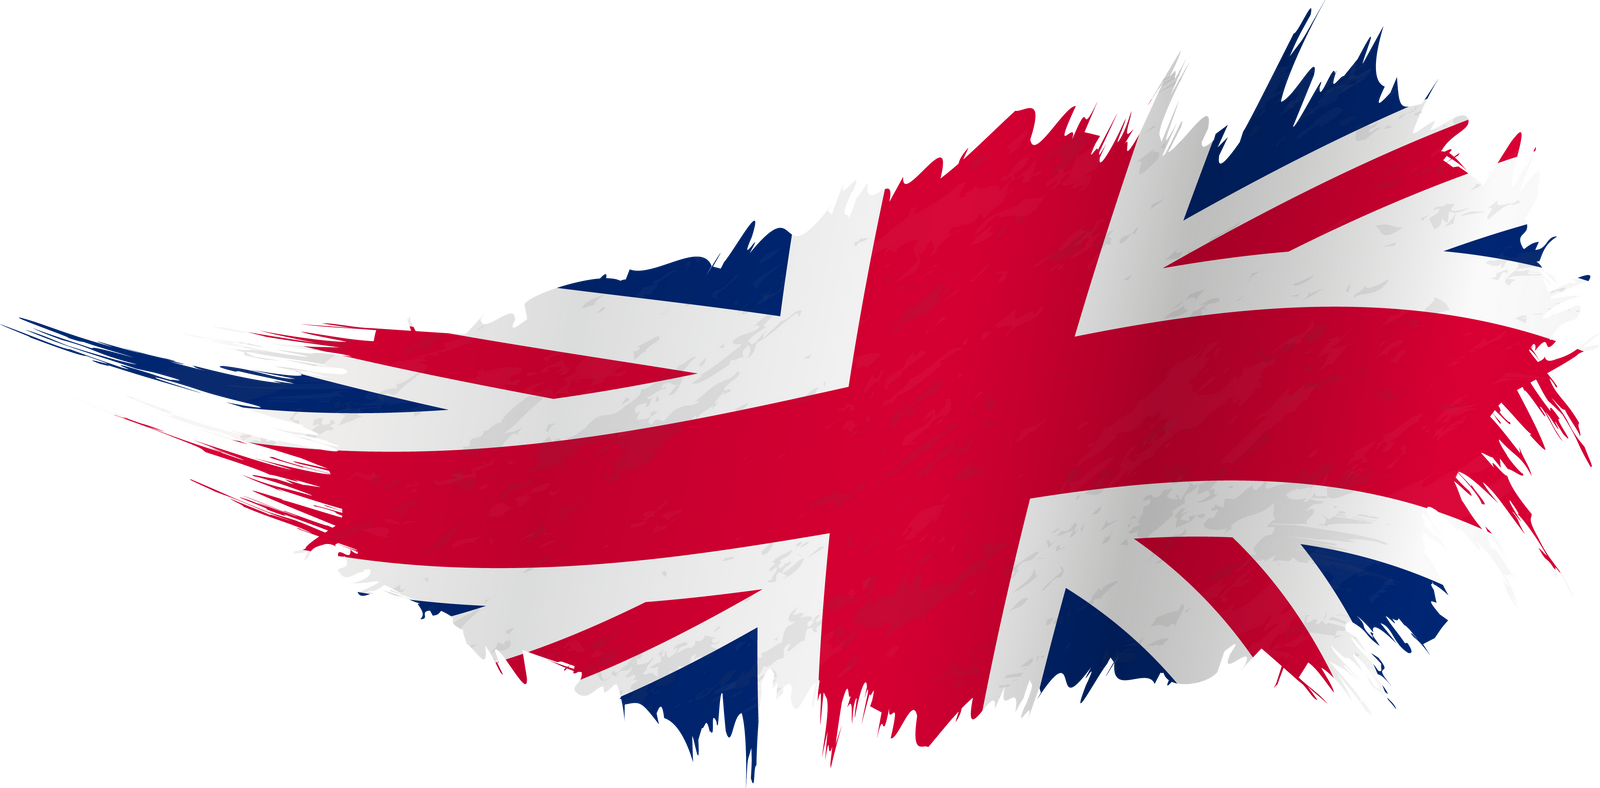 Flag of United Kingdom in grunge style with waving effect.